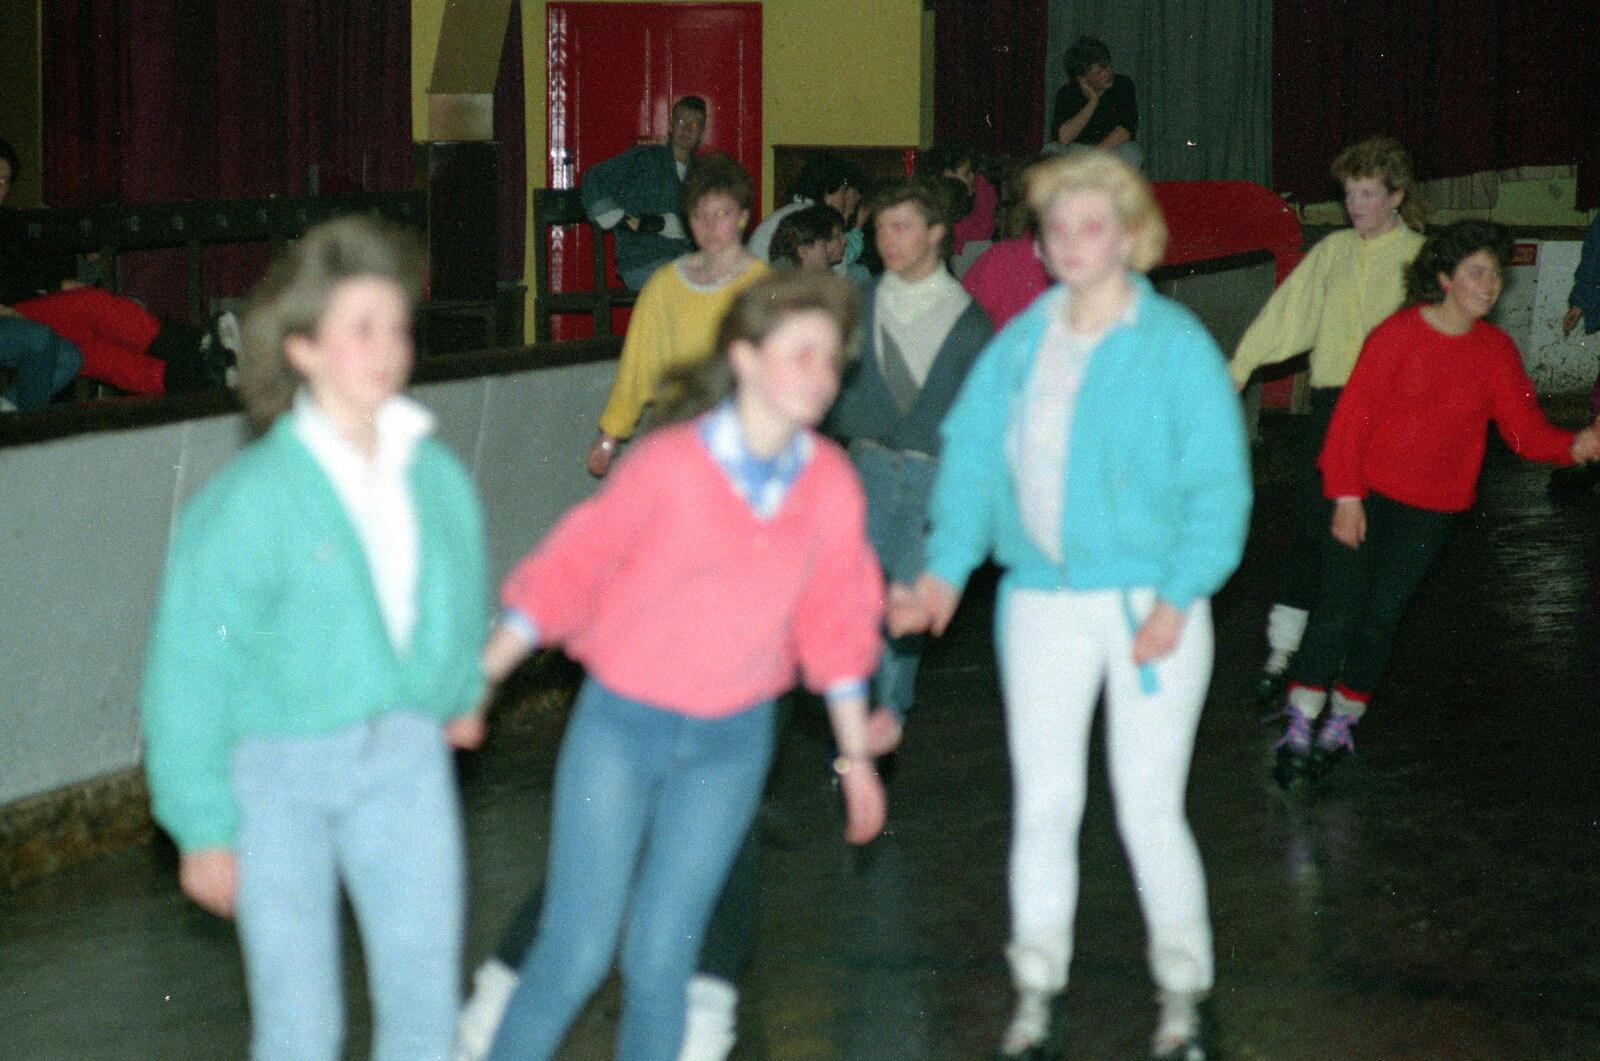 Blurry skaters from A CB Reunion and a Trip to the Beach, Barton on Sea, Hampshire - 4th April 1986